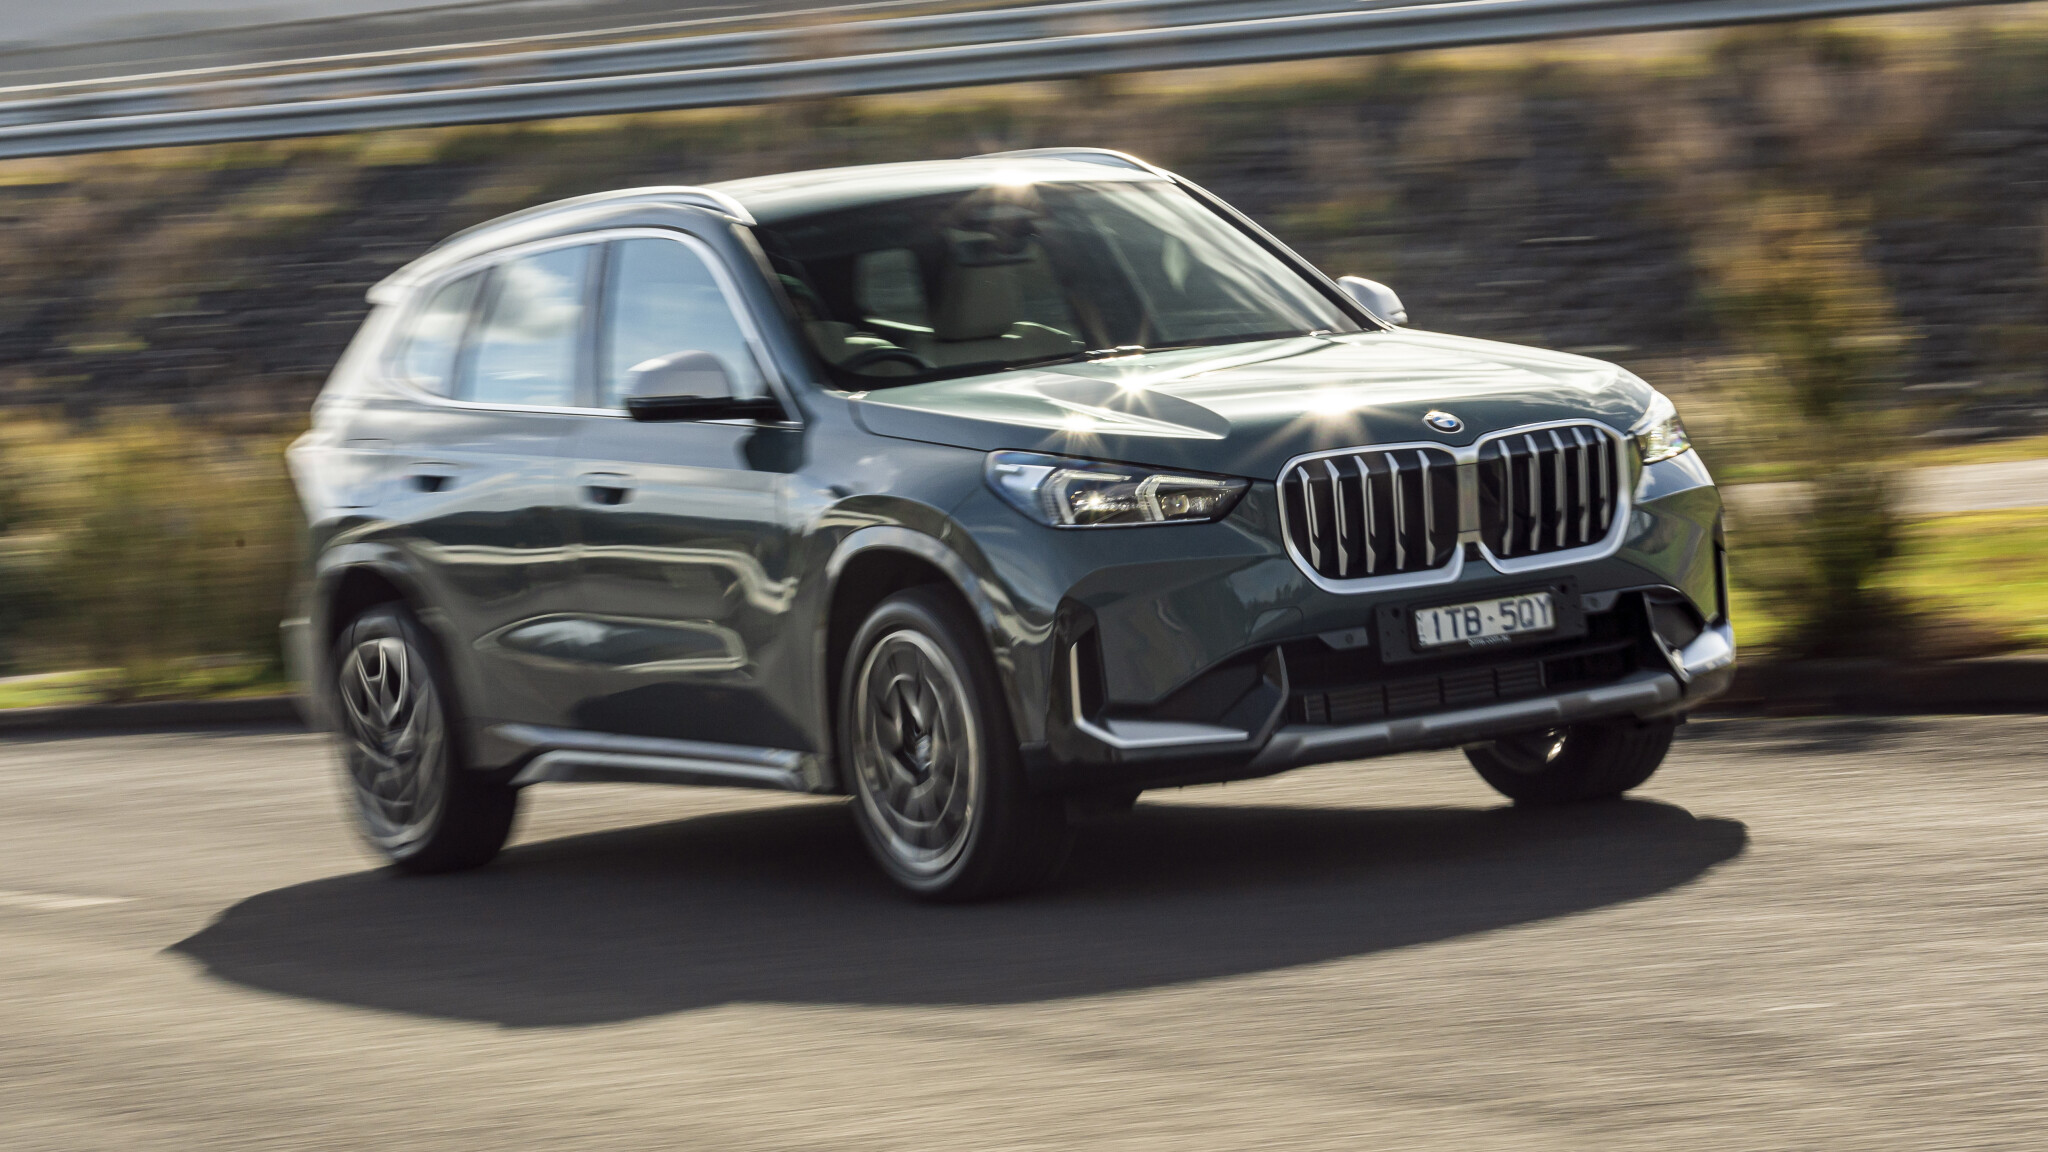 BMW X1 | Reviews, price and specs on all variations